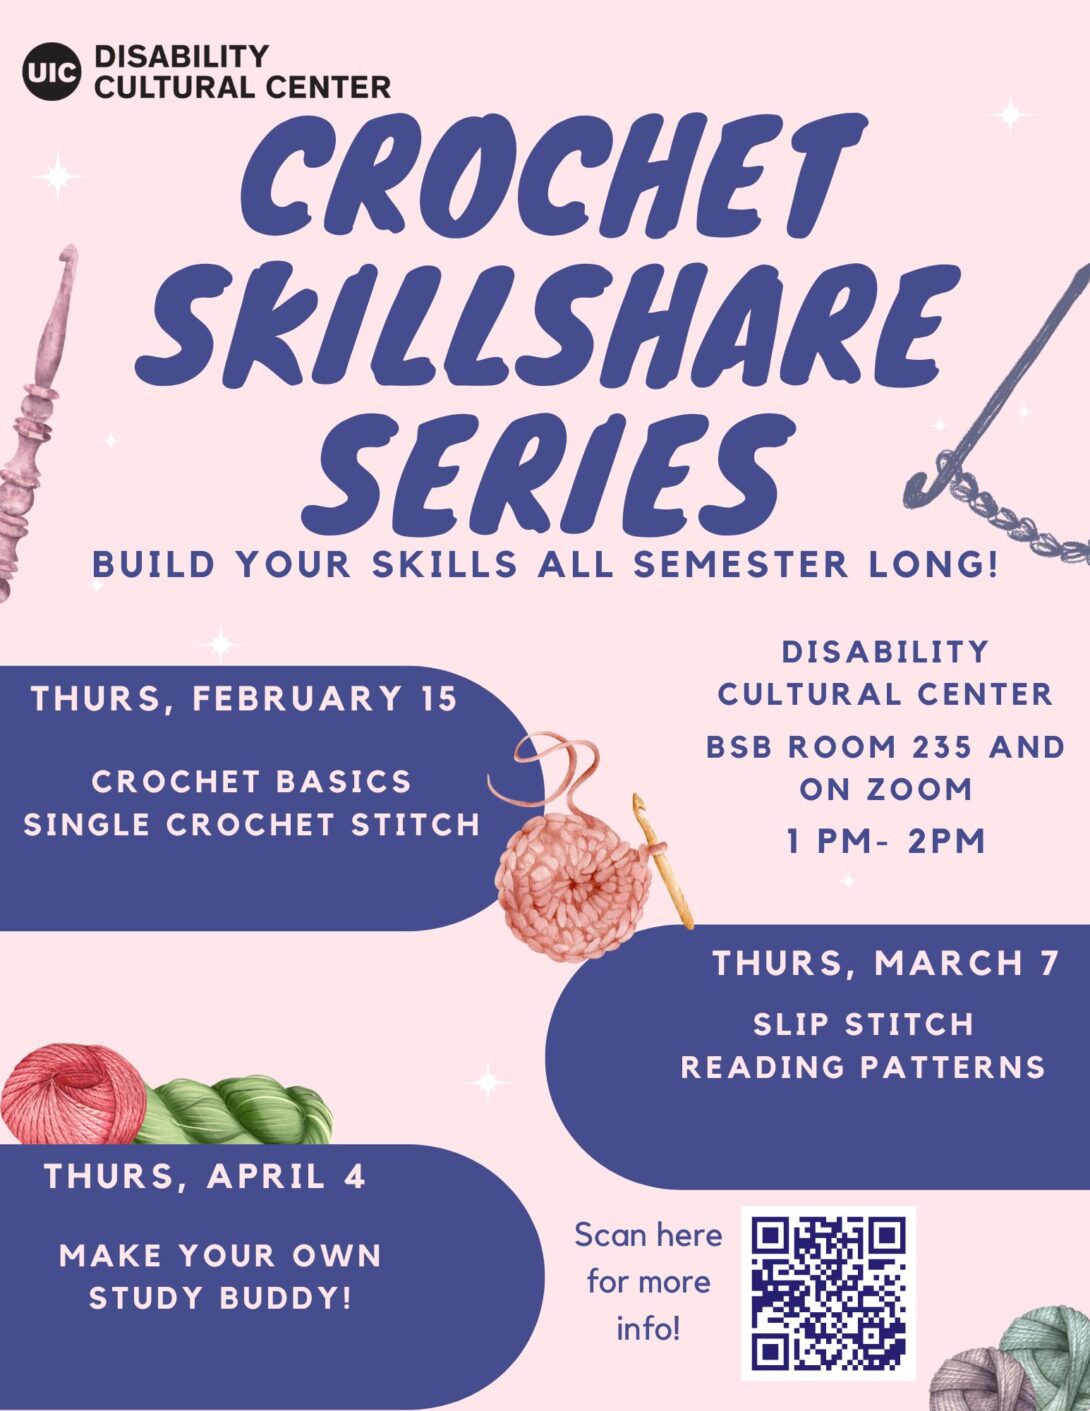 Crochet Skillshare Series flyer, pink with purple text and bubbles for each event. Drawings of yarn and crochet hooks decorate the flyer.